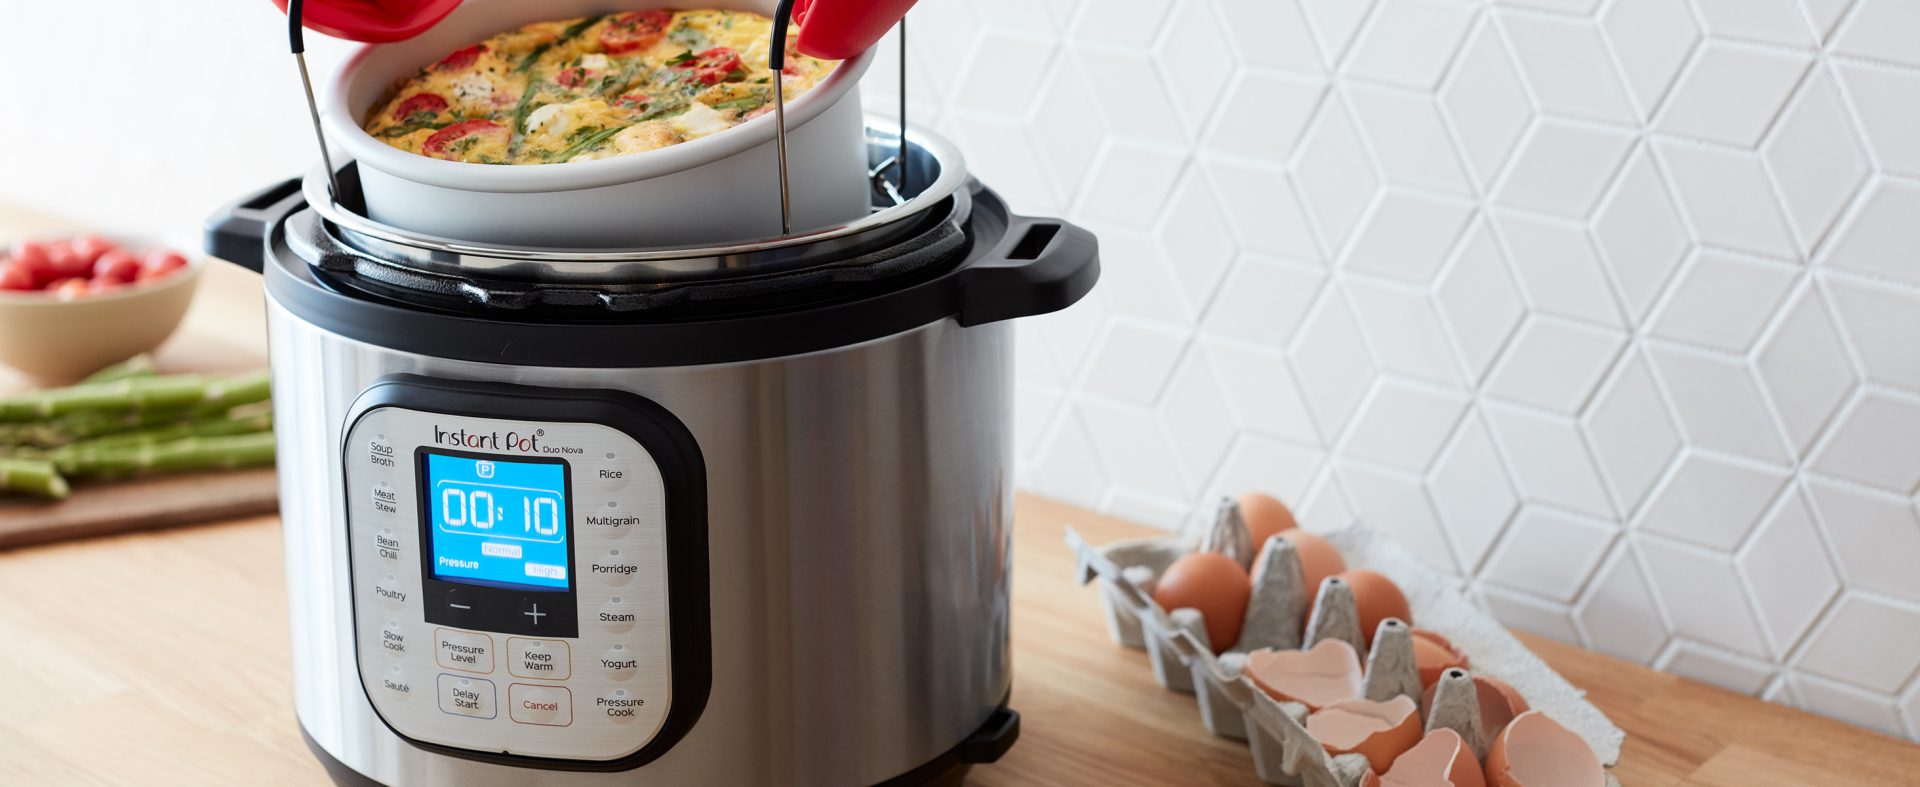 Instant Pot Duo 7-in-1 Multi-Cooker 5.7L Product Image 10